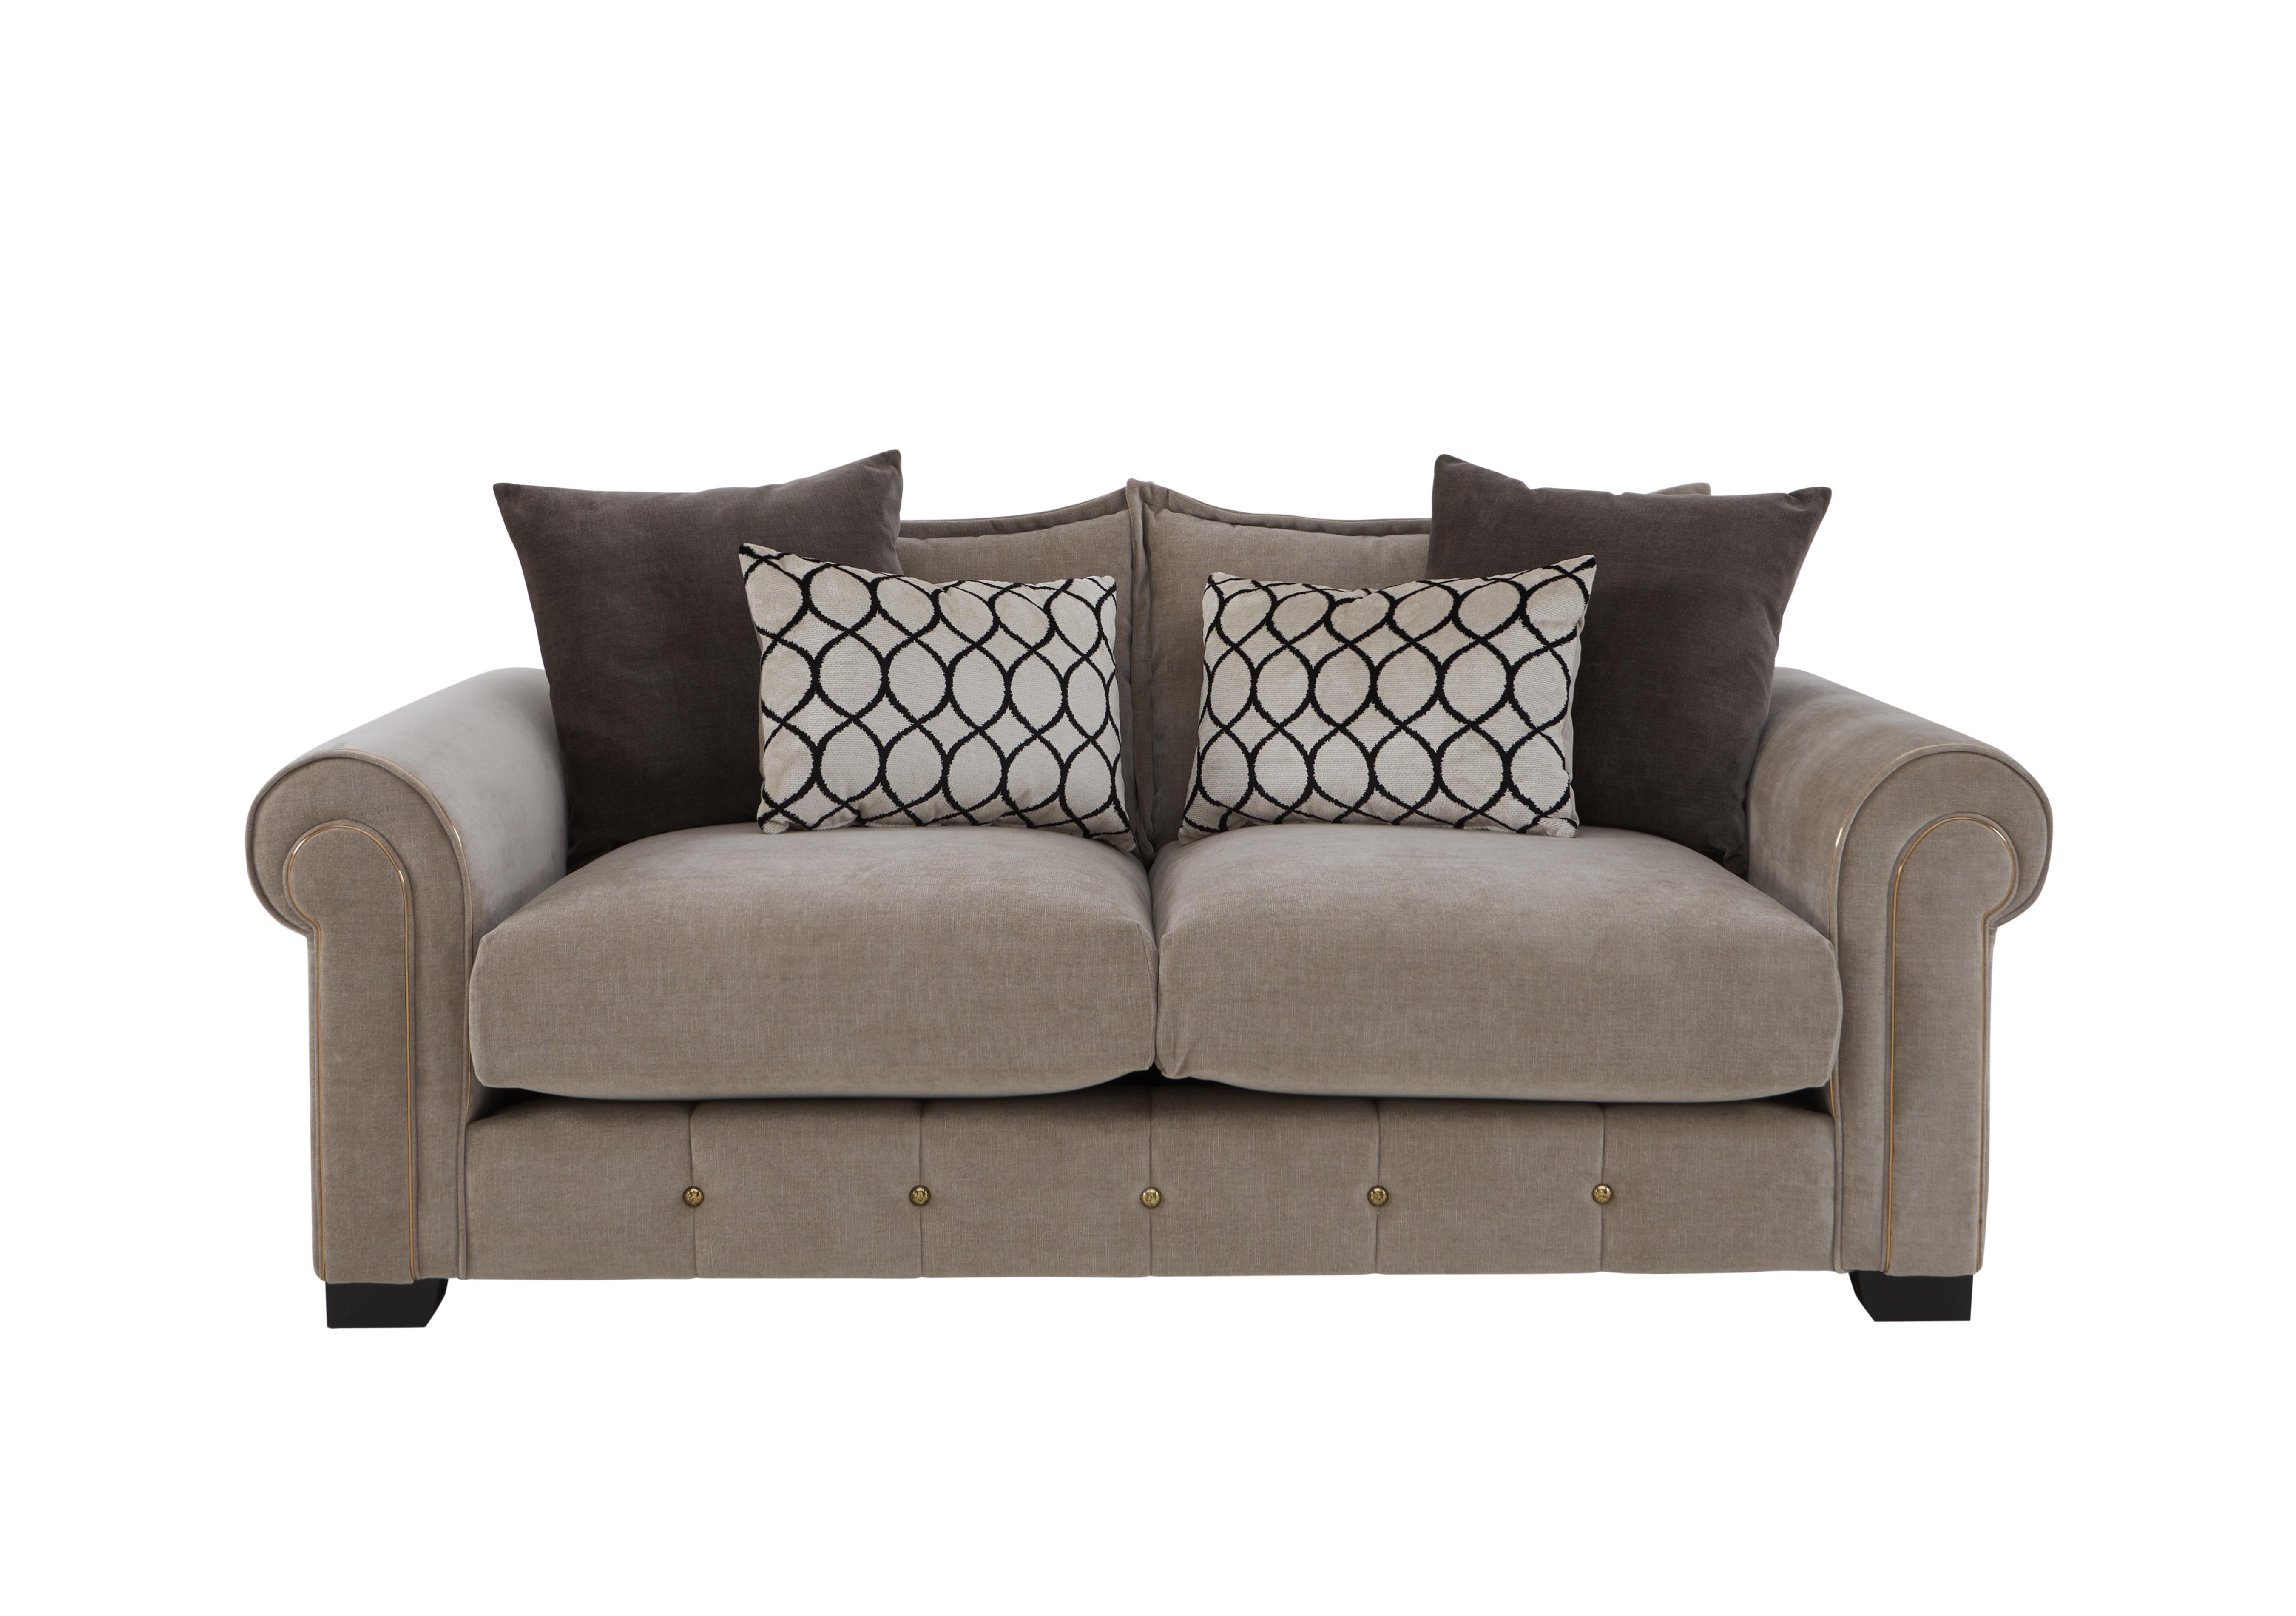 Sumptuous 3 Seater Fabric Sofa in Chamonix Wicker Dk/Gold on Furniture Village